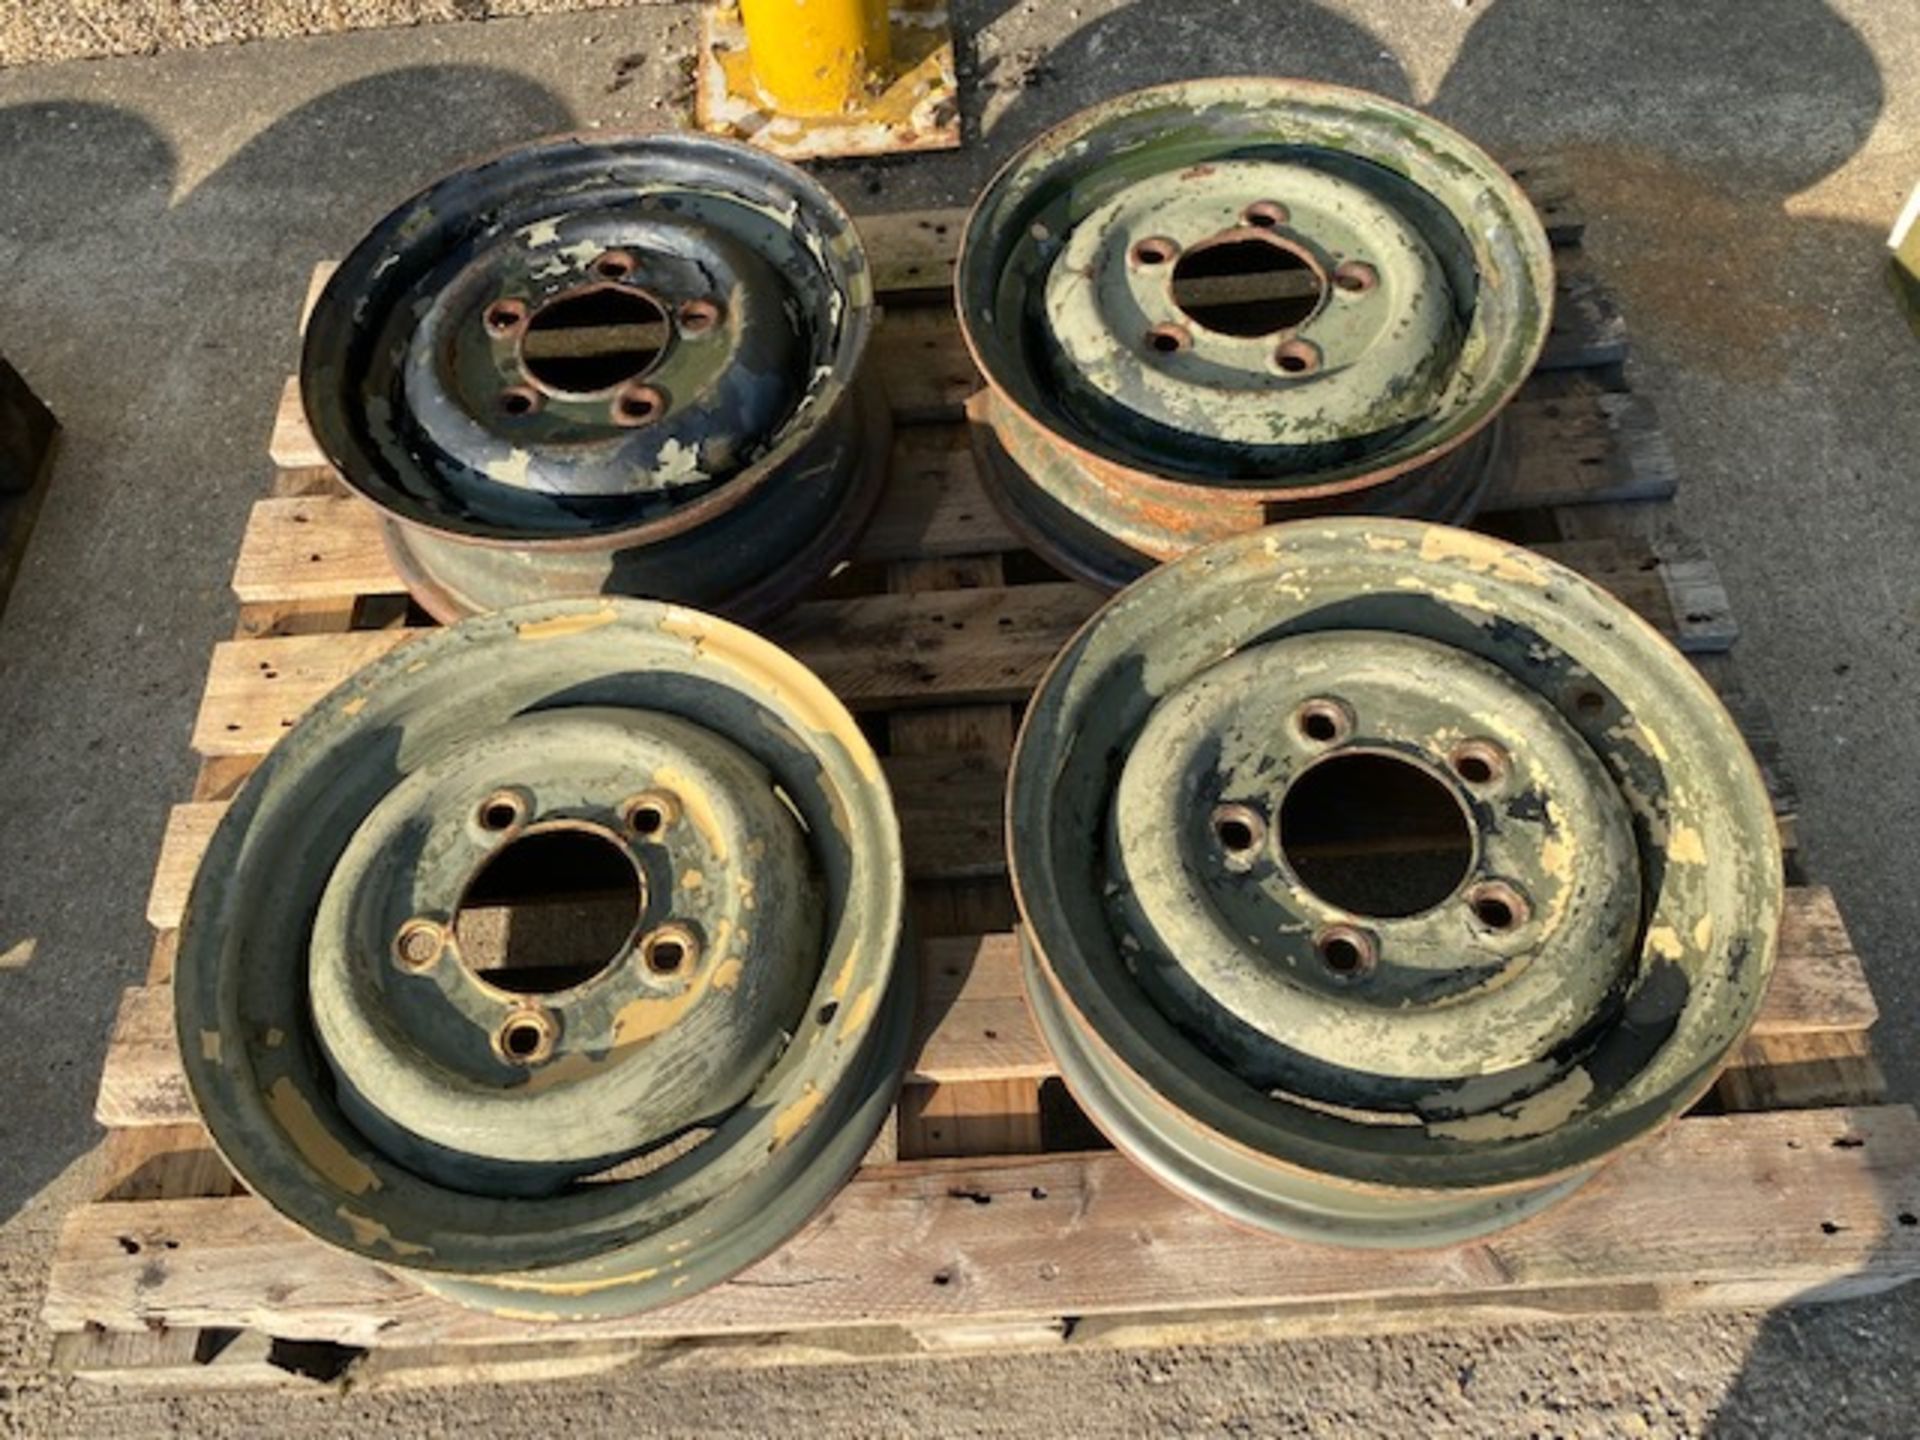 4 x Land Rover Shallow Dish Wheel Rims for Lightweights, Sankey Trailers etc